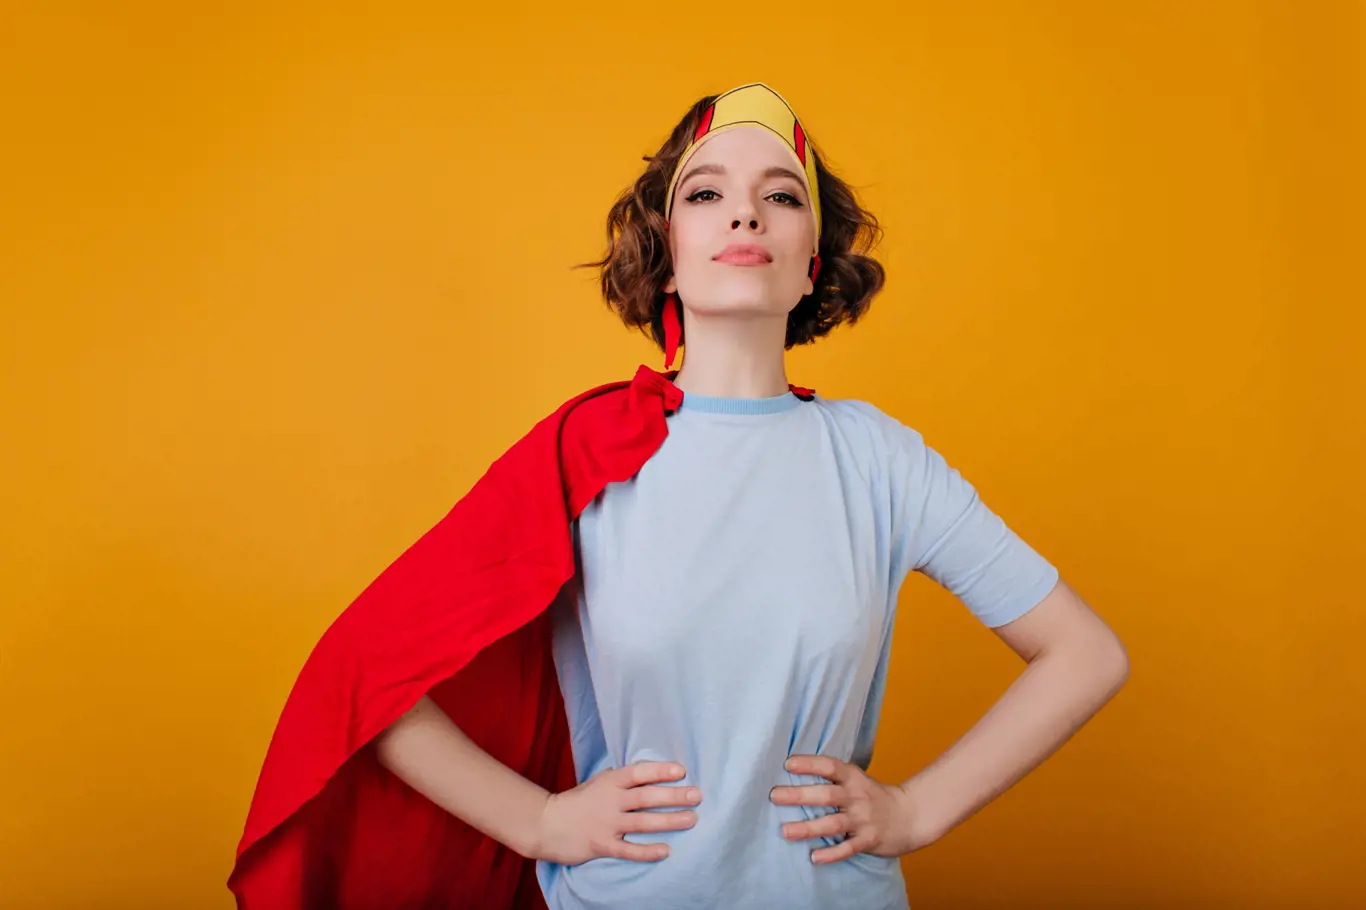 Confident curly girl in superhero attire posing on bright yellow background. Adorable lady with short hair wearing paper crown and red cloak.